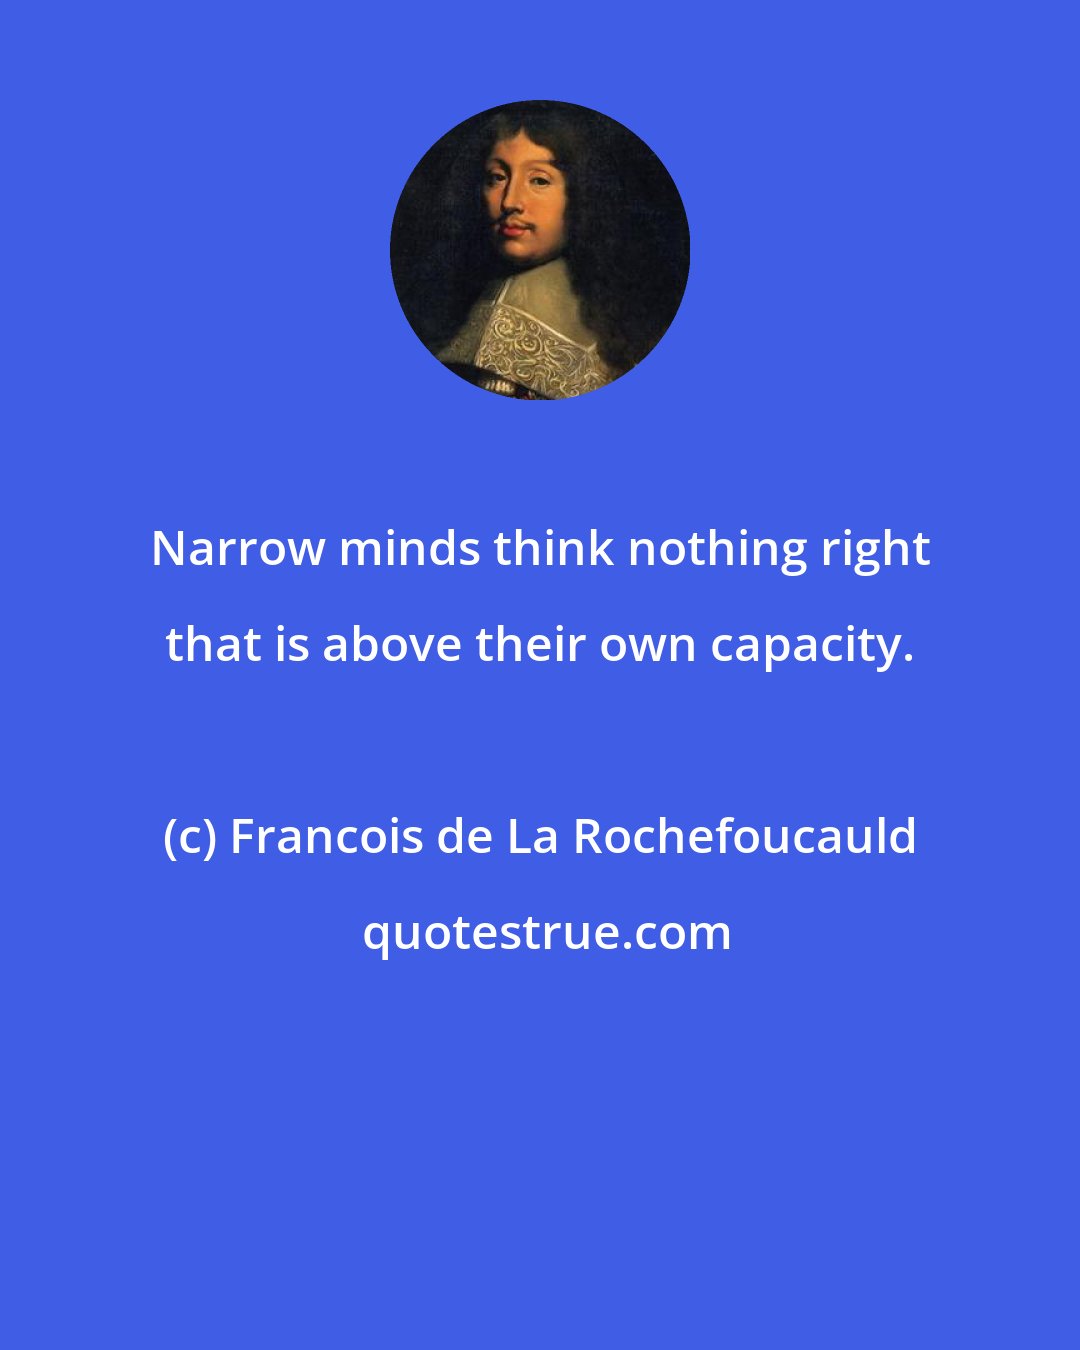 Francois de La Rochefoucauld: Narrow minds think nothing right that is above their own capacity.